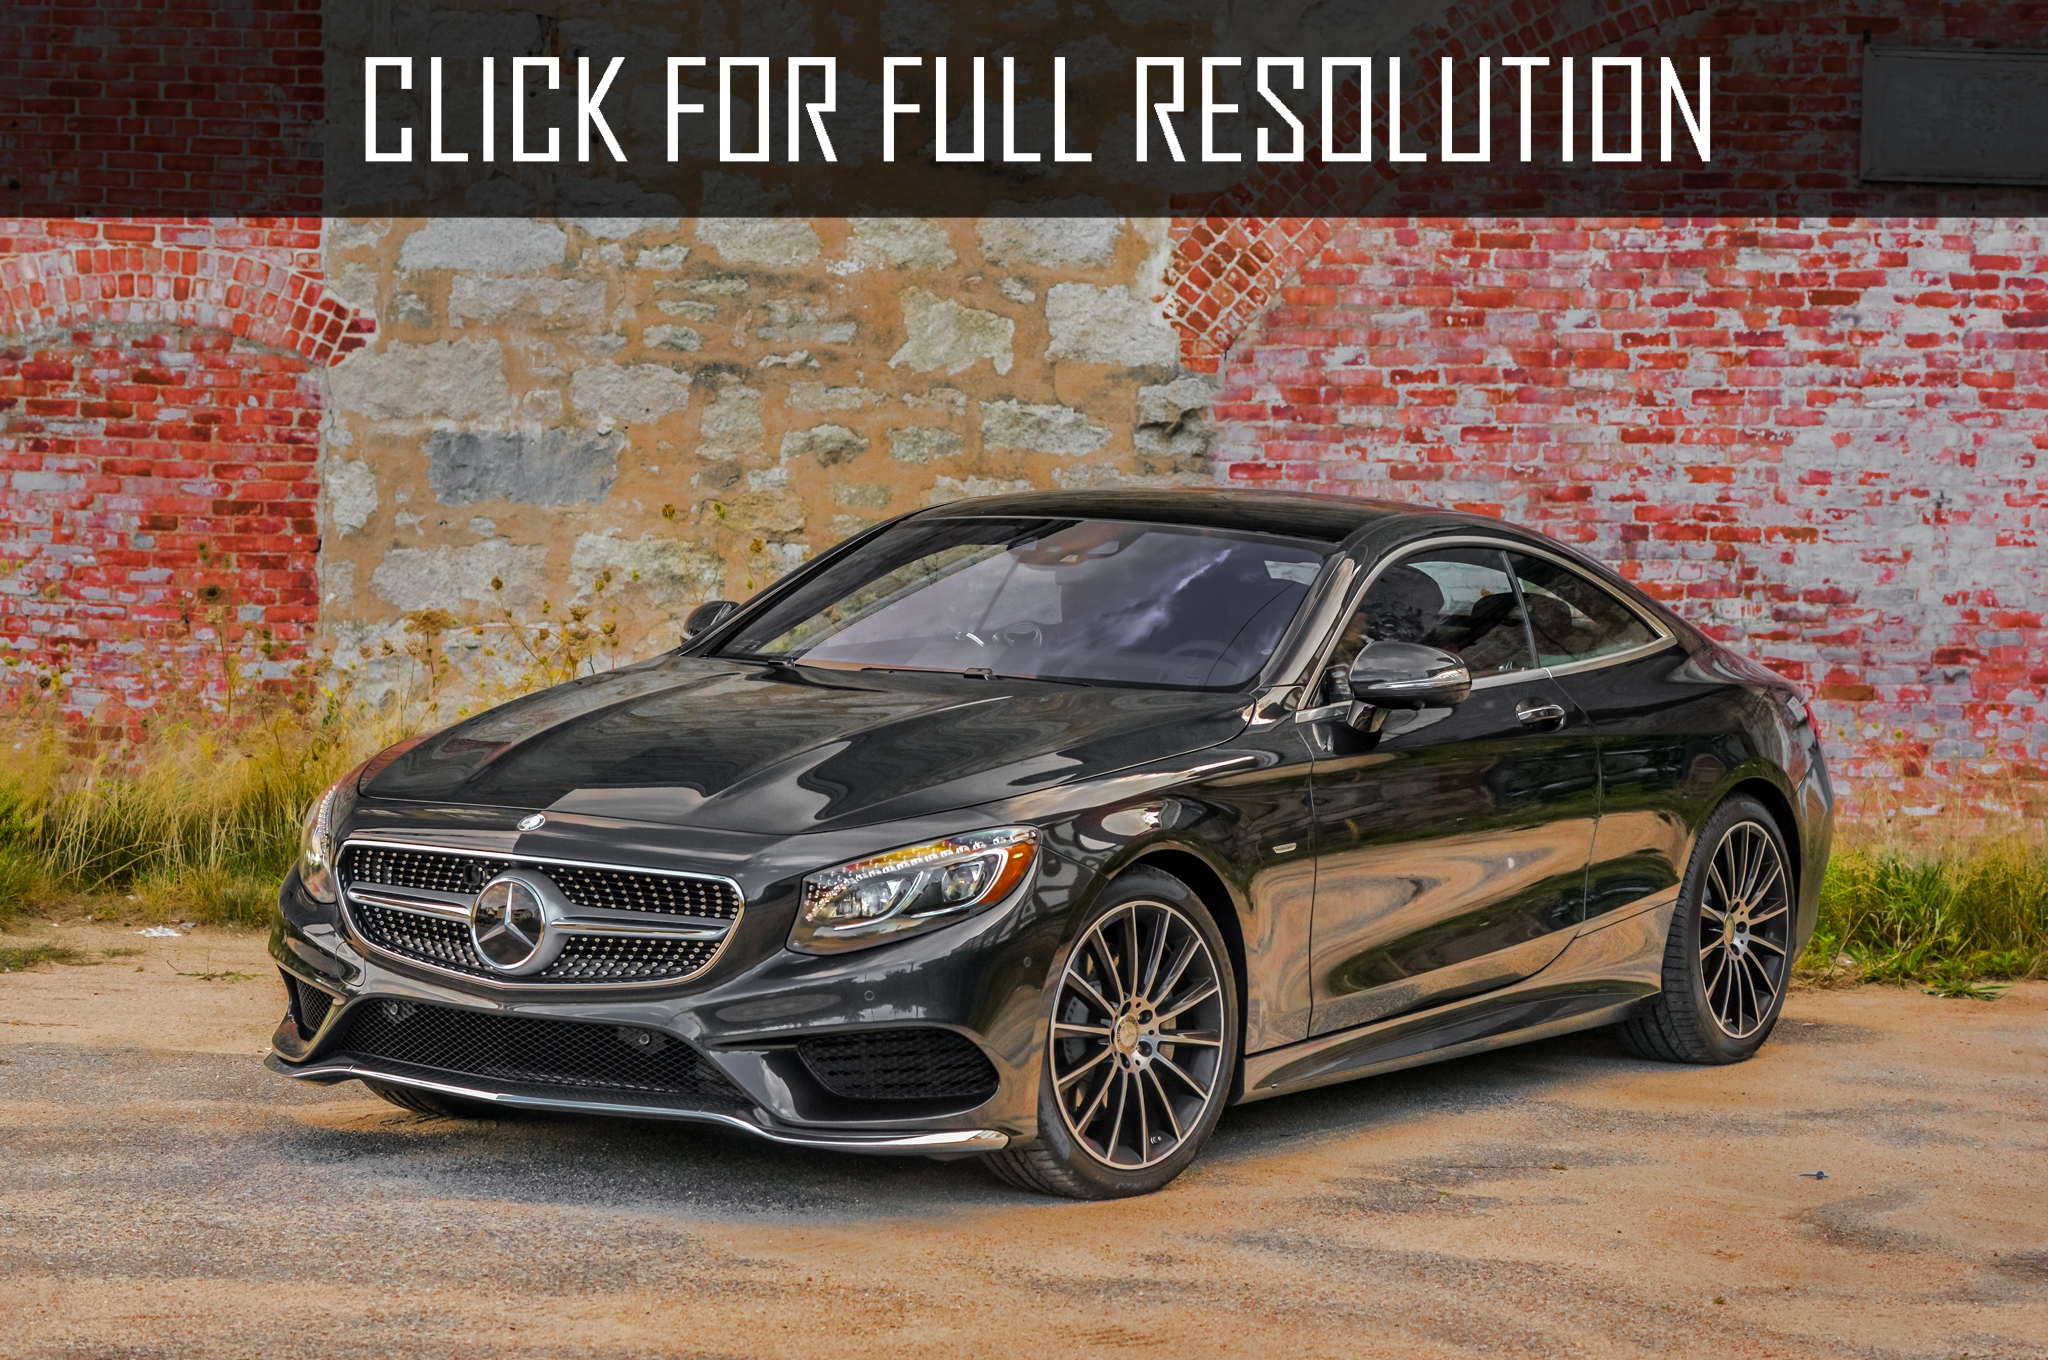 Mercedes Benz S550 Amg Coupe amazing photo gallery, some information